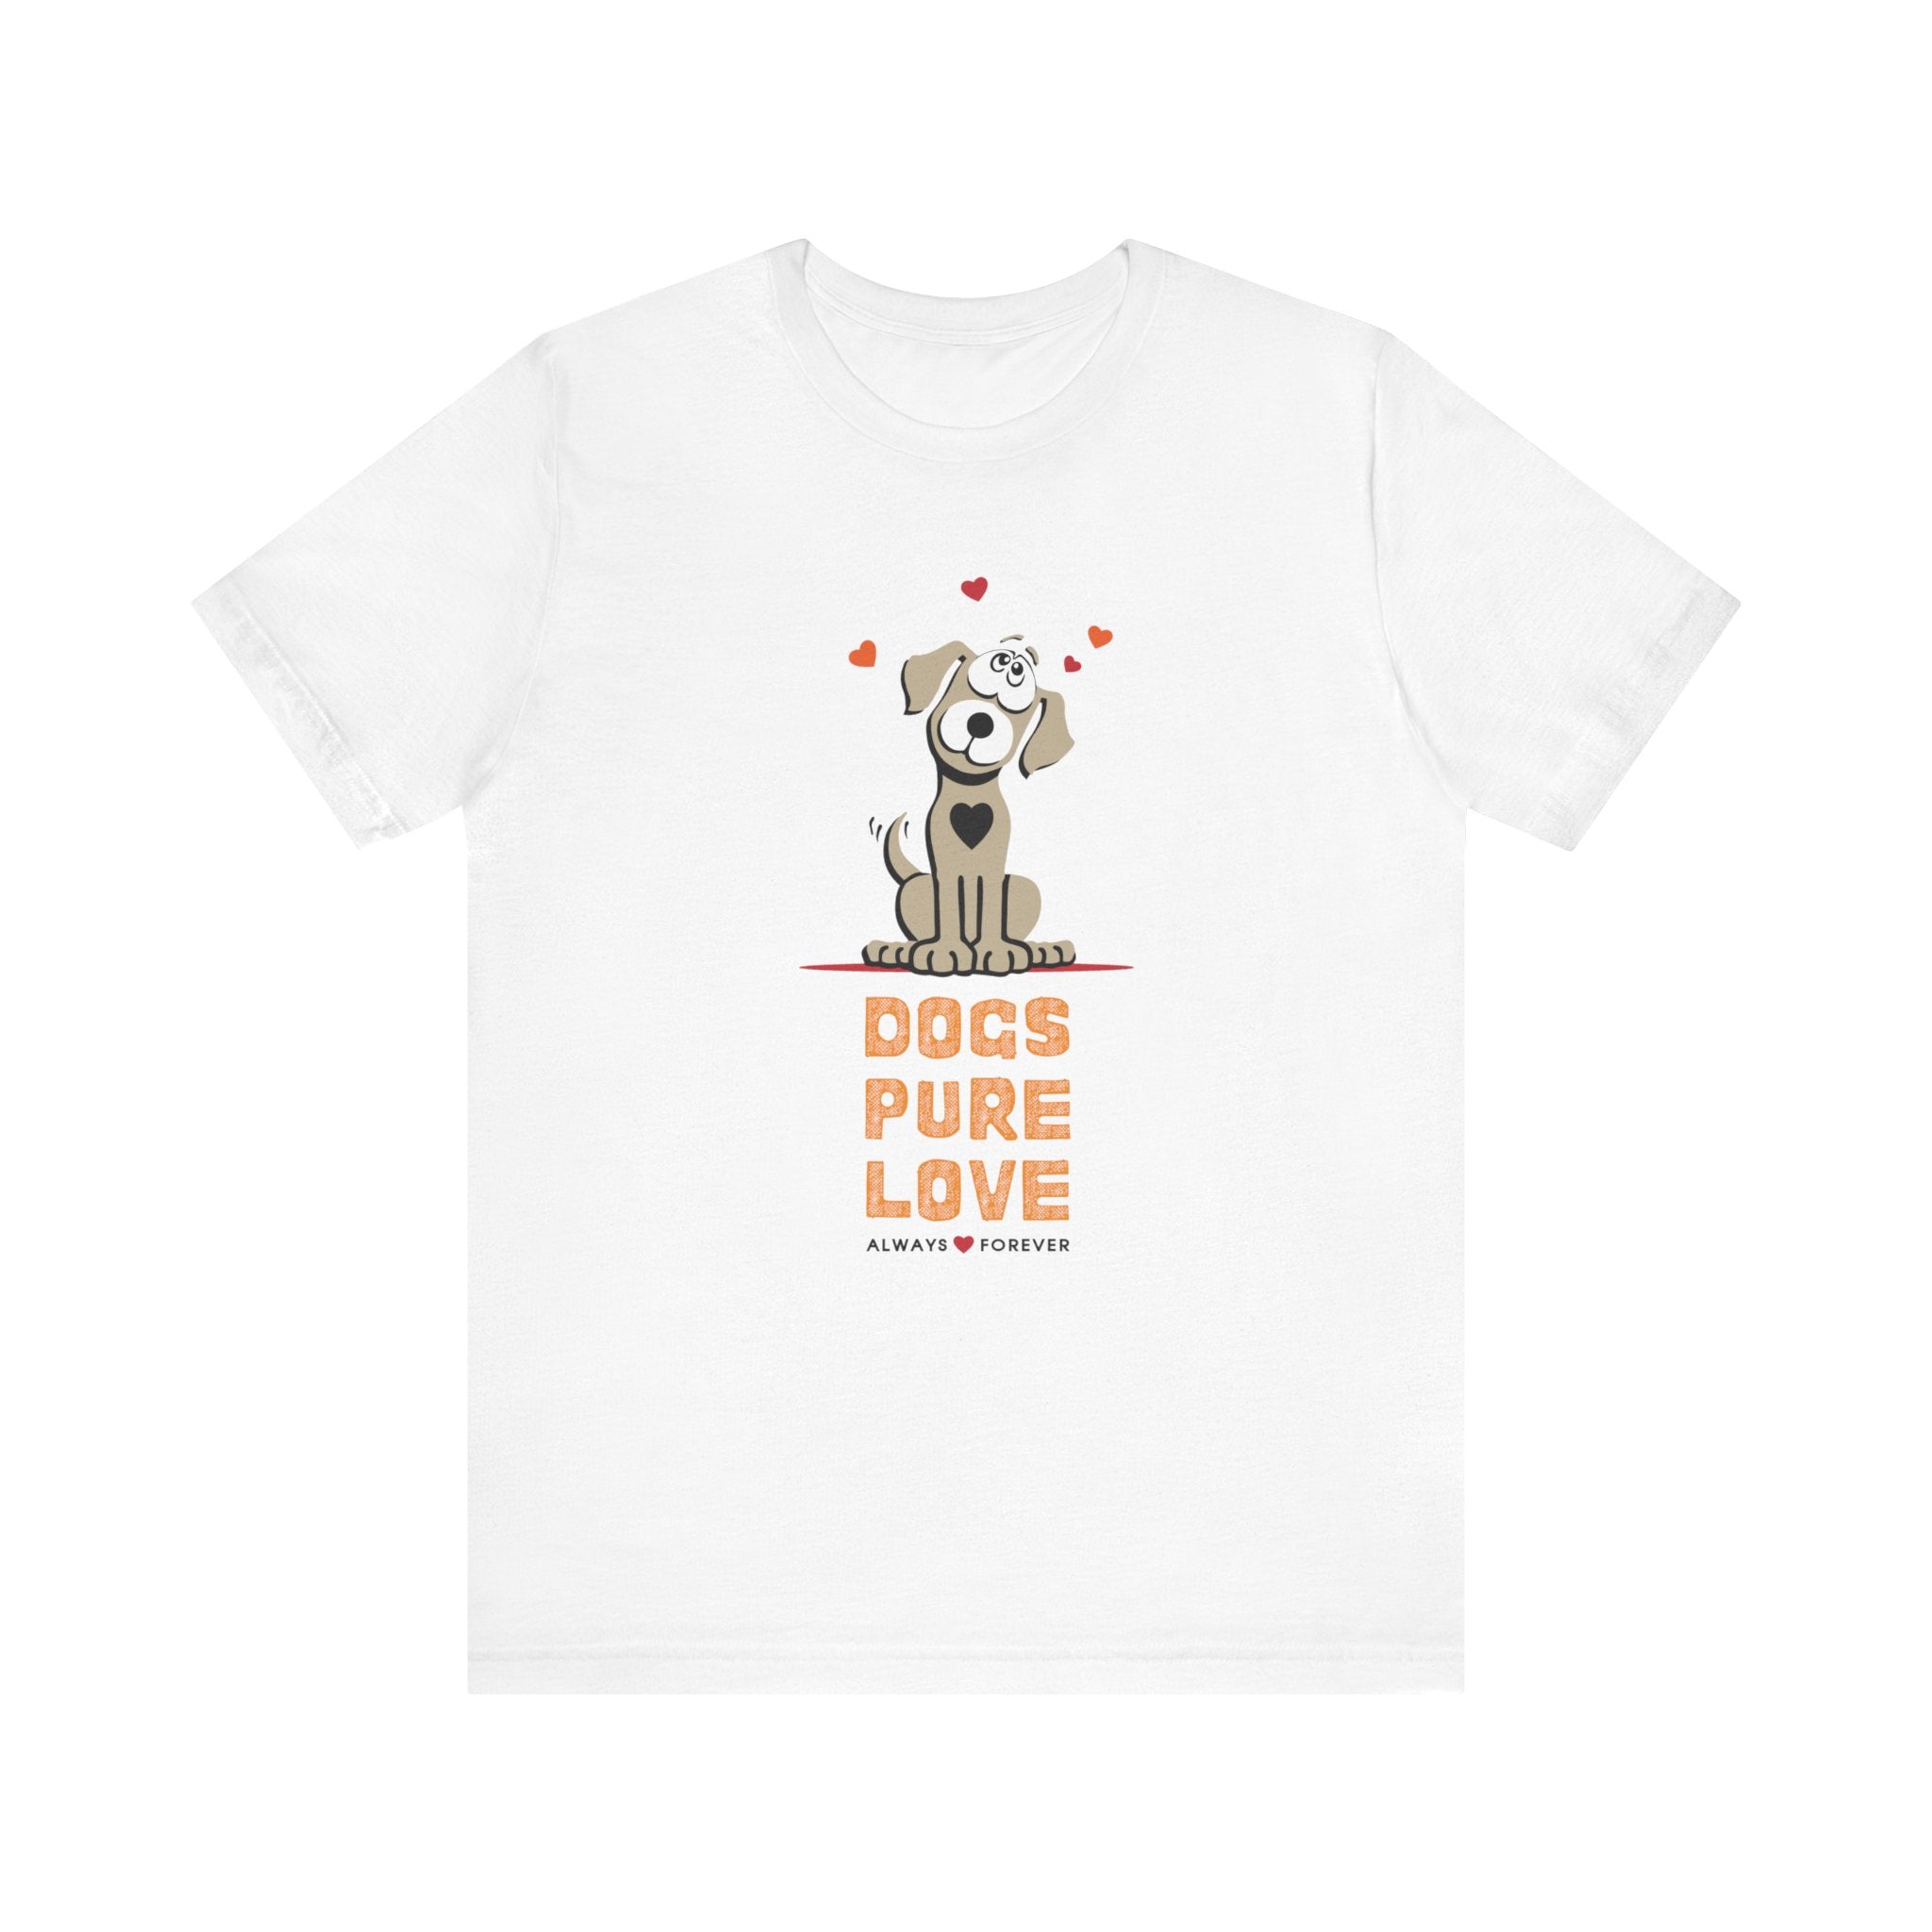 Against a white backdrop, a white unisex tee shows the Dogs Pure Love logo.